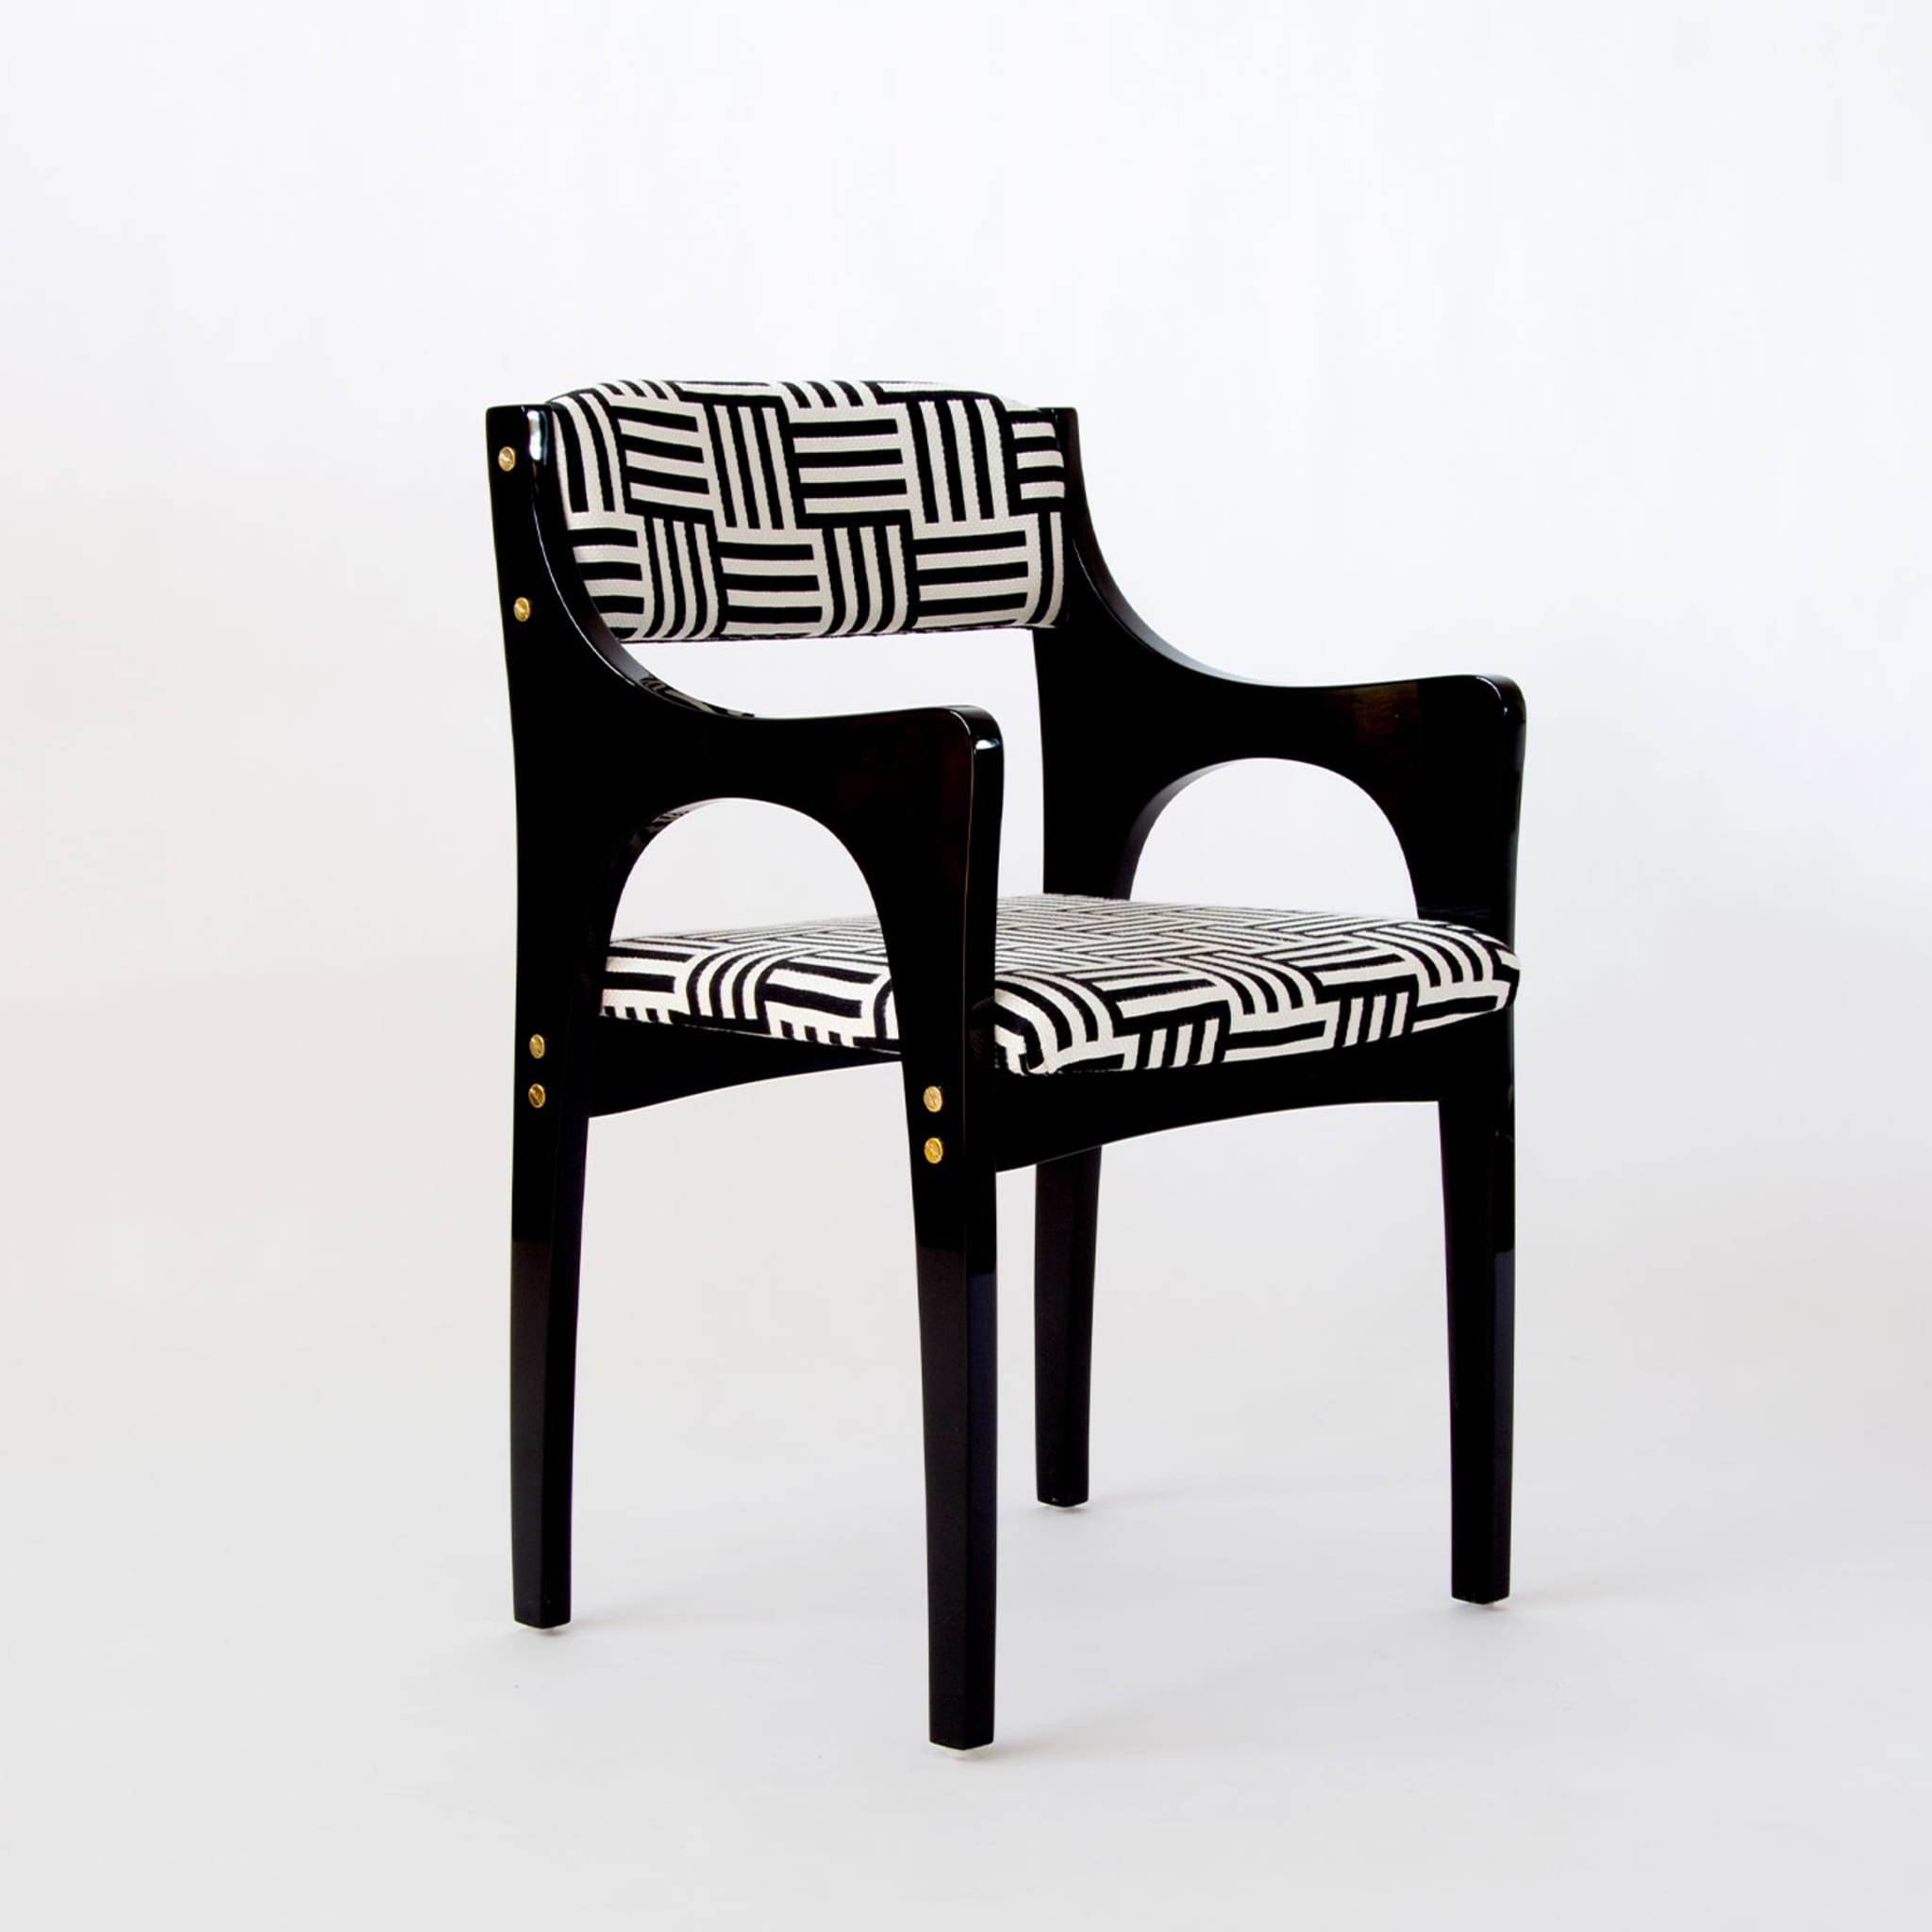 Lola 50's-Inspired Black & White Chair With Arms - Alternative view 1